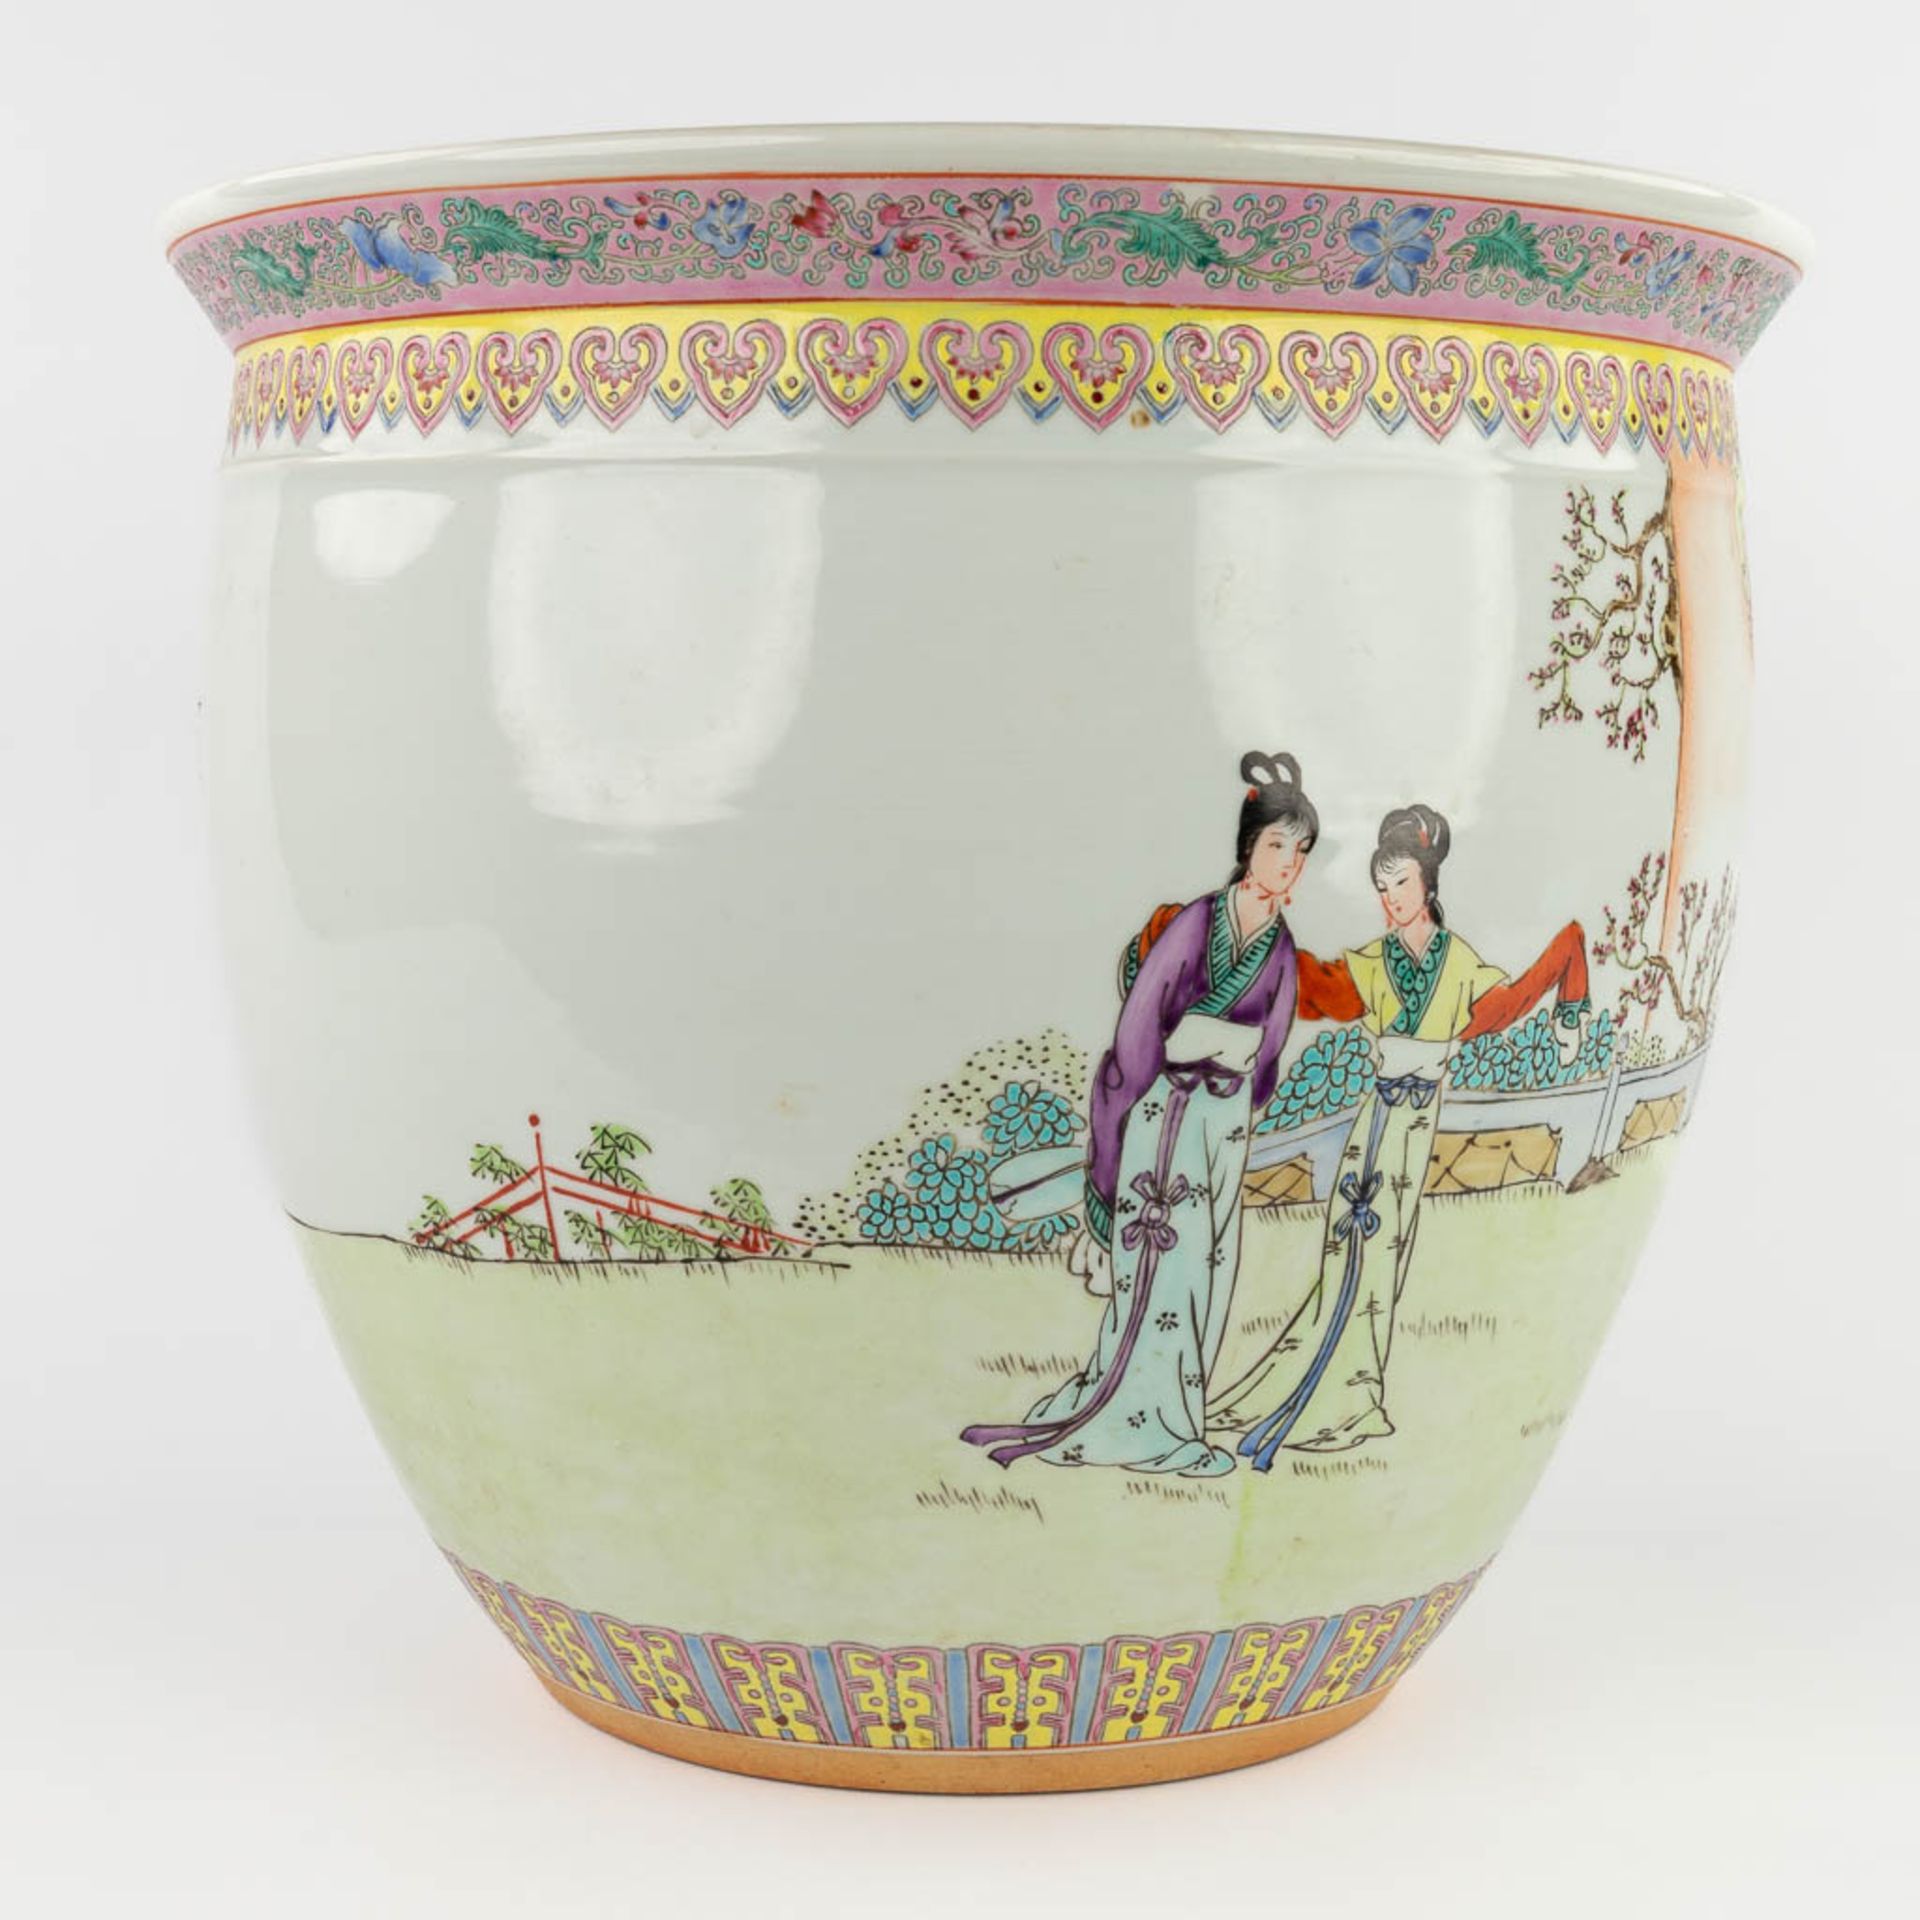 A large Chinese cache-pot decorated with figurines in a garden. 20th C. (H:36 x D:40 cm) - Image 4 of 13